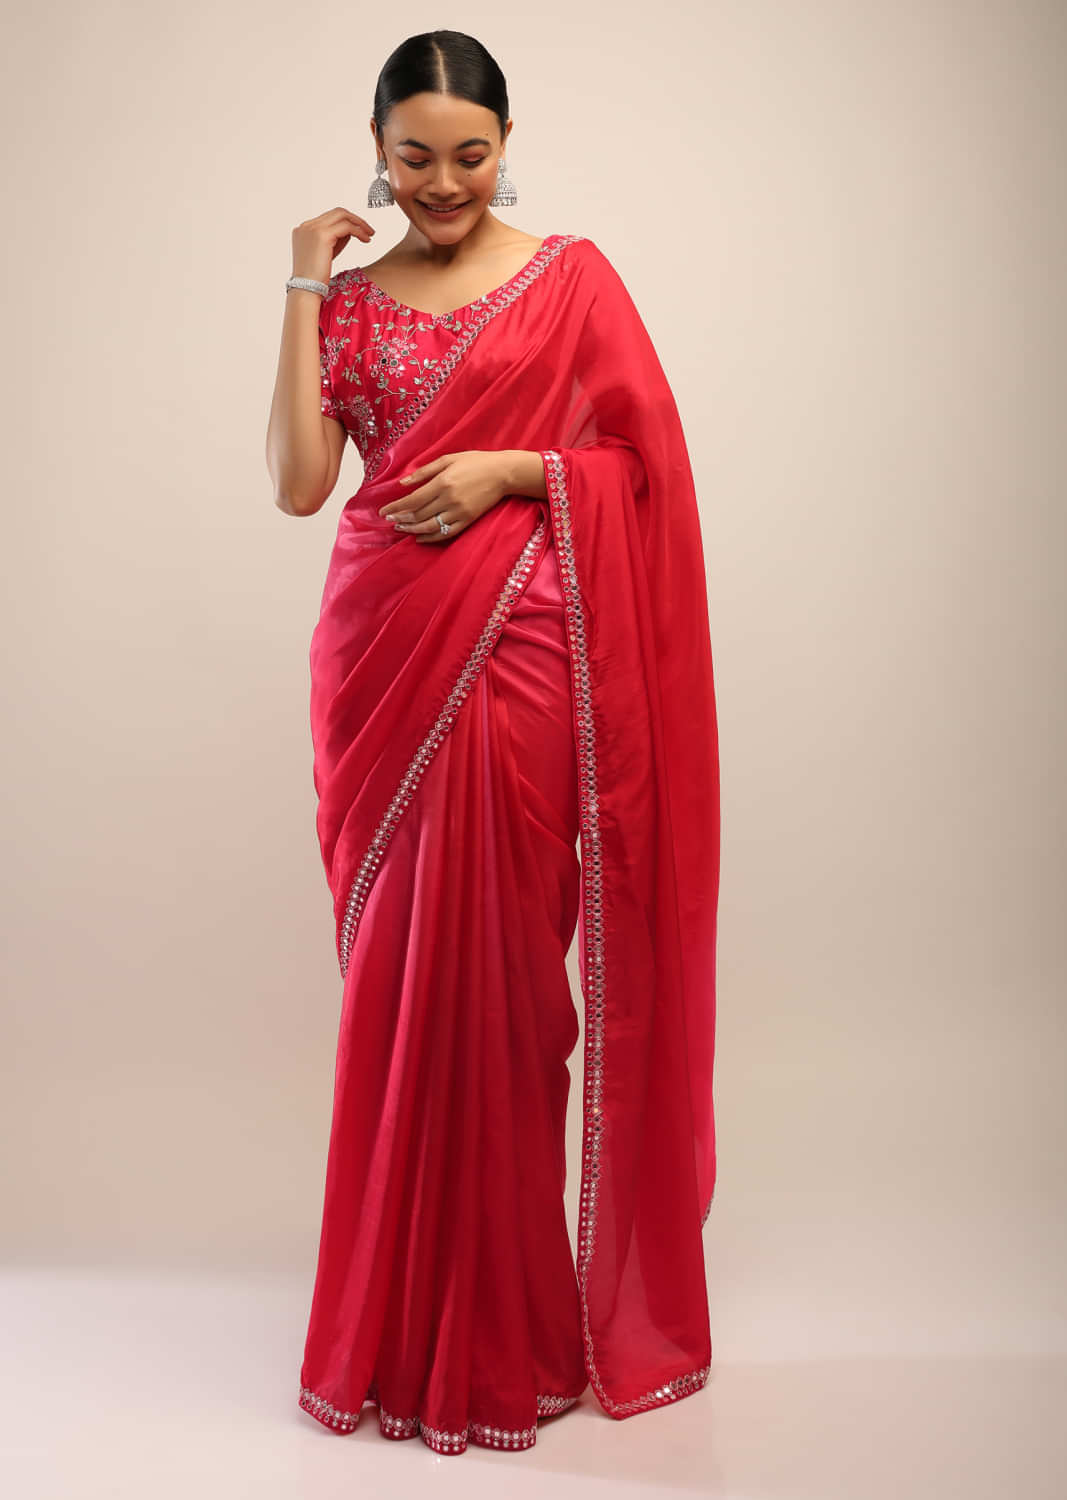 Red And Fuchsia Shaded Saree In Satin Crepe With Mirror Abla Embroidered Border And Ready Blouse